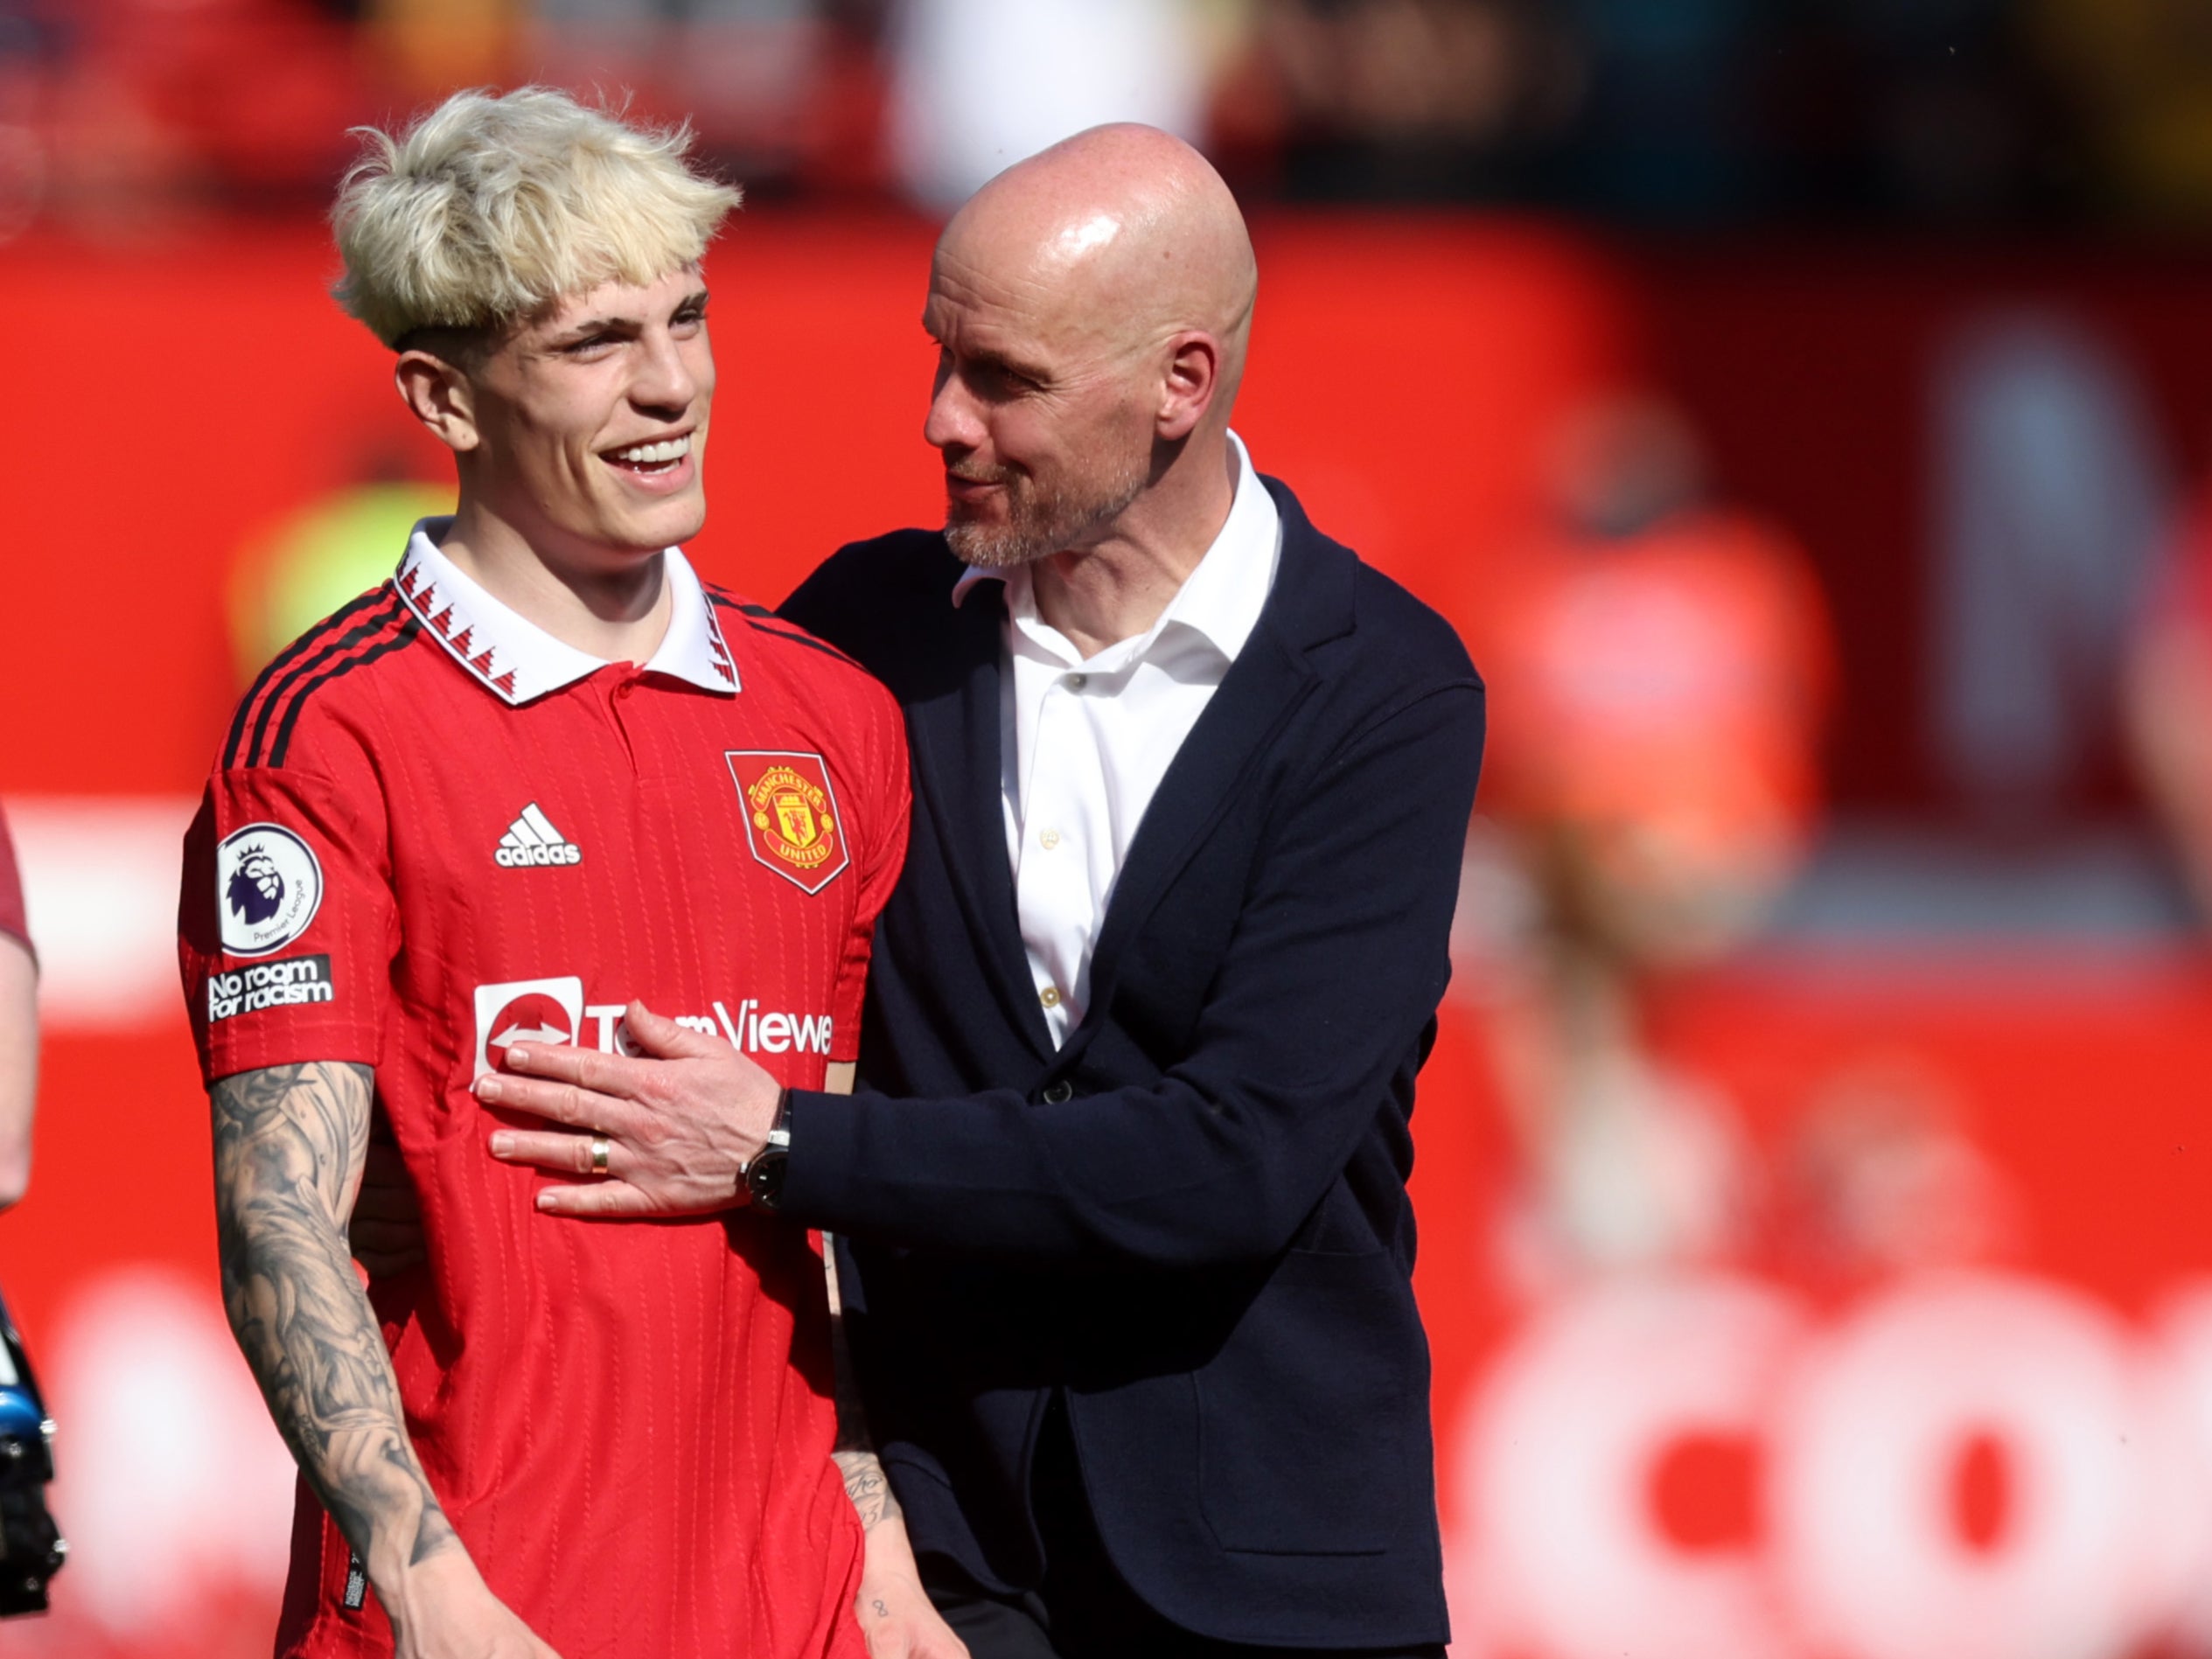 Ten Hag shares a joke with Alejandro Garnacho after the win at Old Trafford